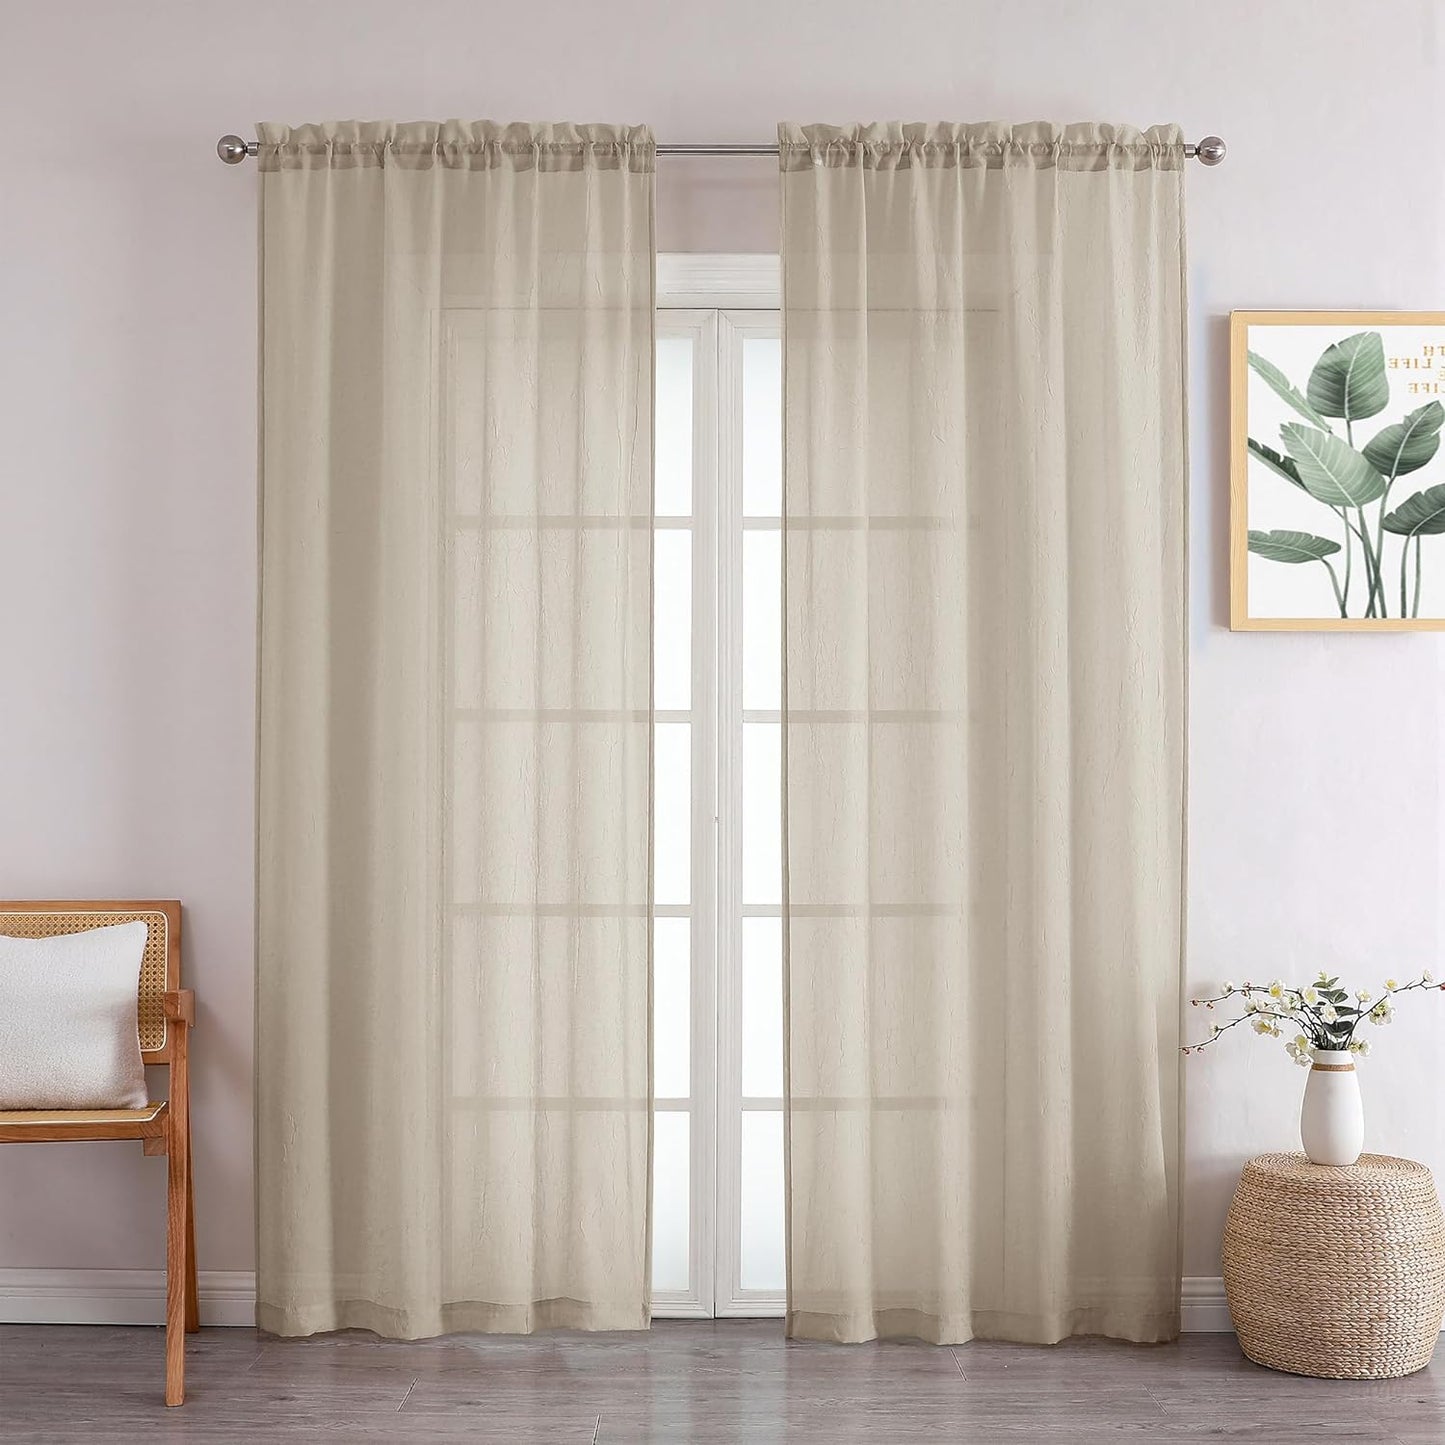 Crushed Sheer White Curtains 63 Inch Length 2 Panels, Light Filtering Solid Crinkle Voile Short Sheer Curtian for Bedroom Living Room, Each 42Wx63L Inches  Chyhomenyc Taupe 42 W X 84 L 